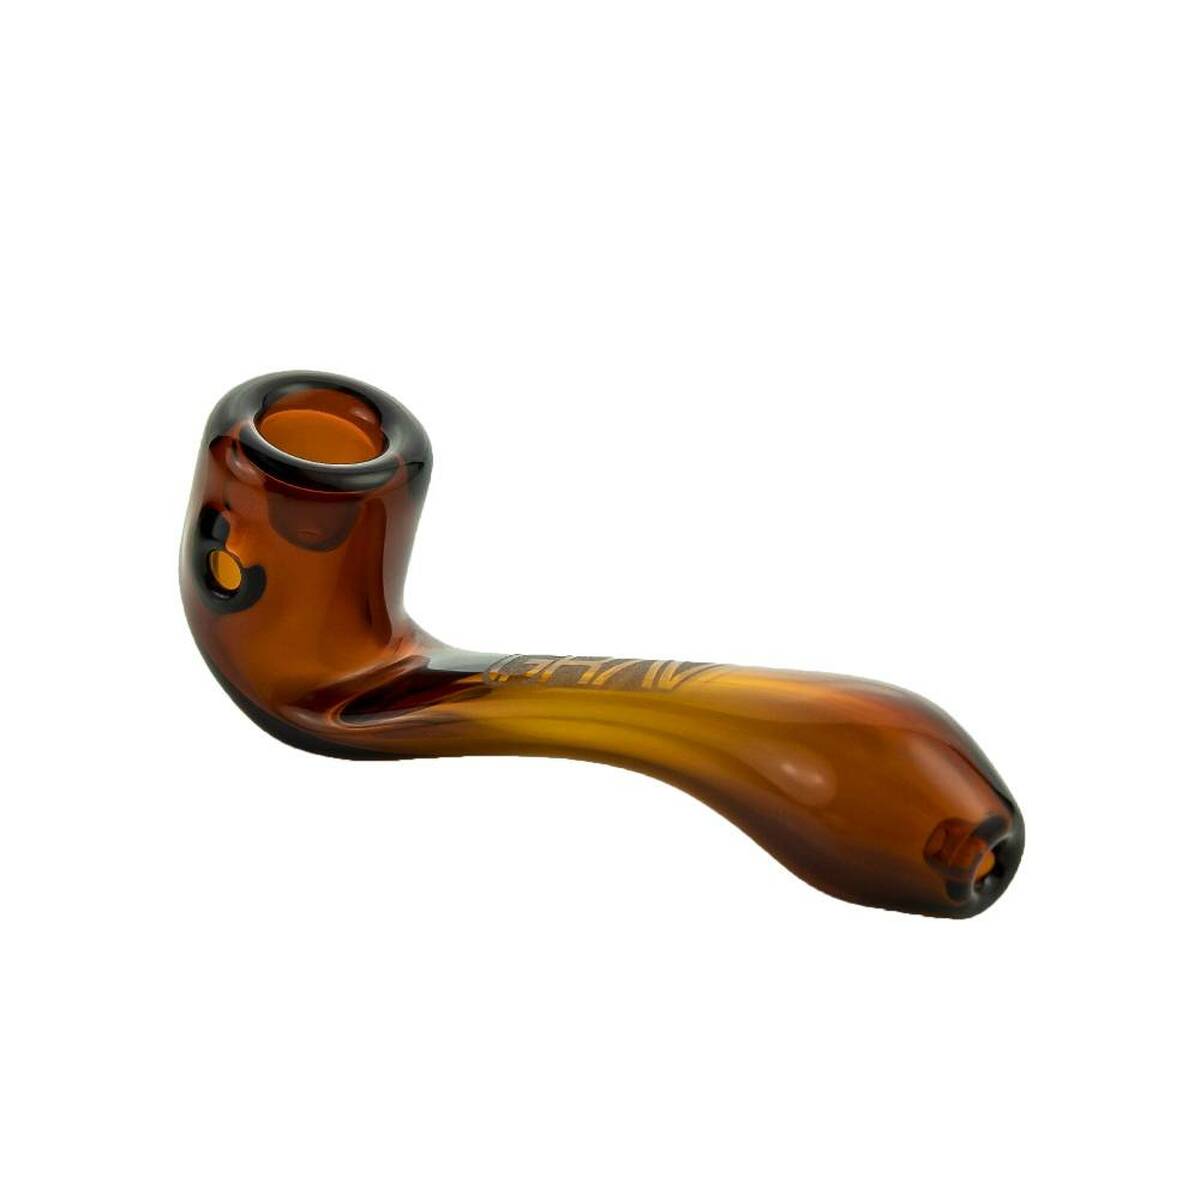 The small GRAV Sherlock is 4" long and made on 25mm tubing. It has an inverted mouthpiece that catches ash, and its small footprint makes it discreet and portable. No accessories or water are necessary for using this hand pipe. The Mini Sherlock is available in a variety of colour choices. 